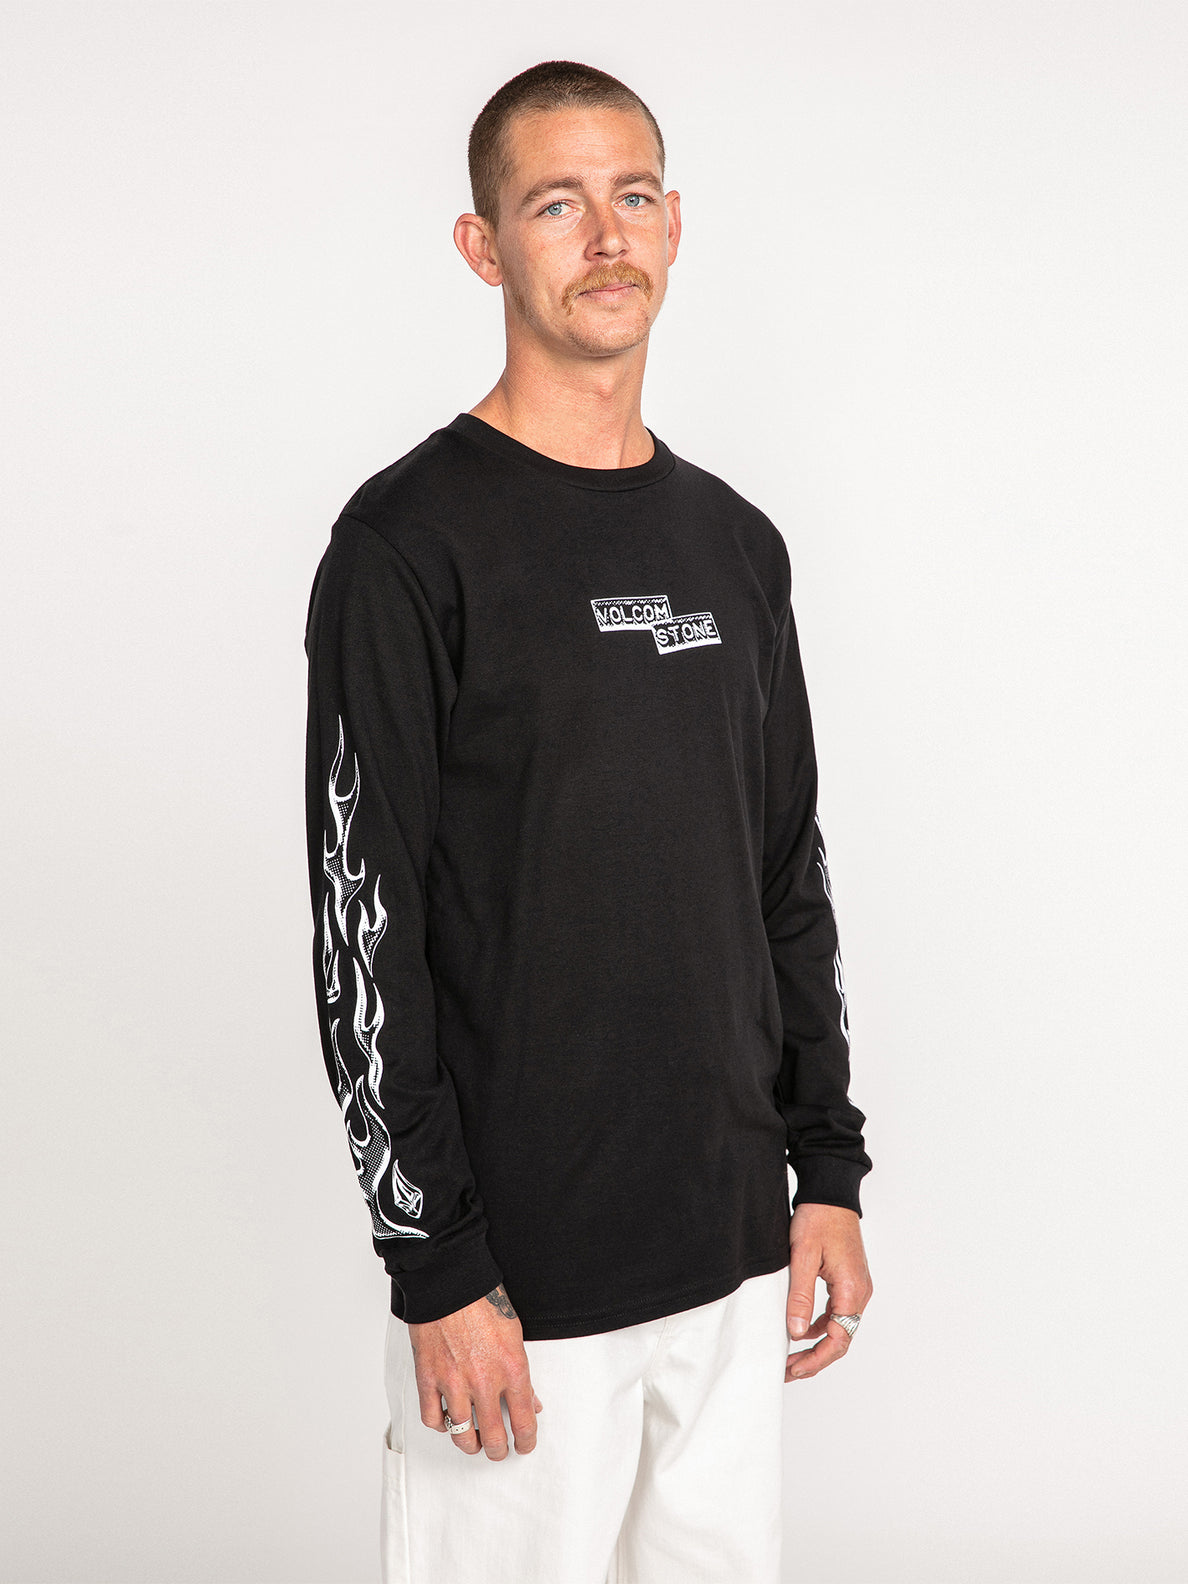 Ignighter Long Sleeve Tee - Black (A3632205_BLK) [F]